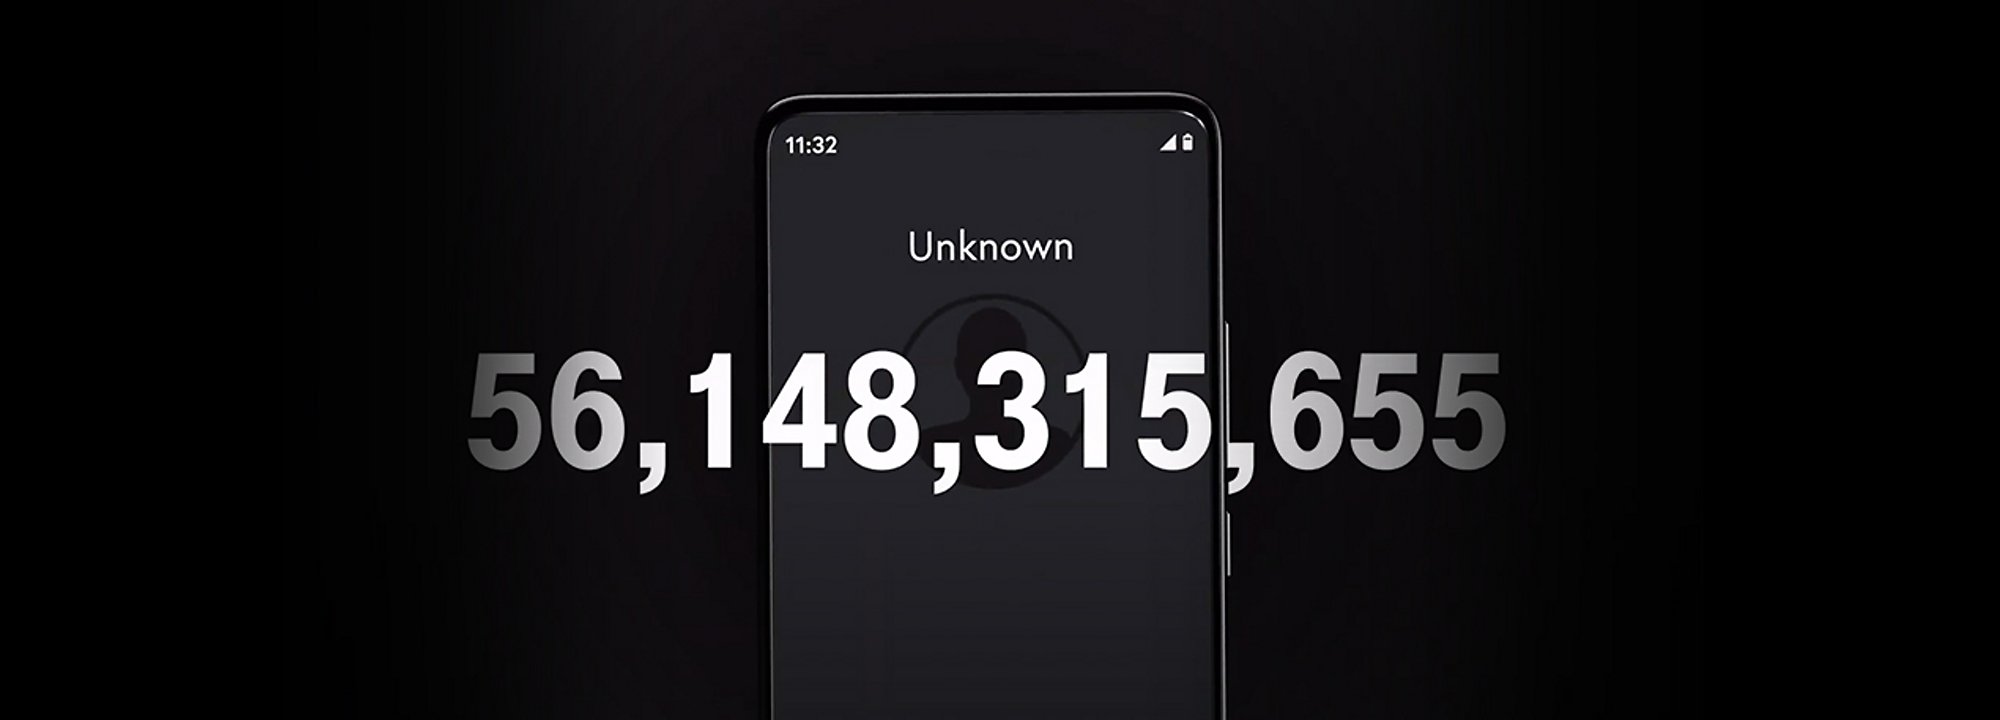 A phone showing a call from an Unknown number, overlayed by the number 56,148,315,655